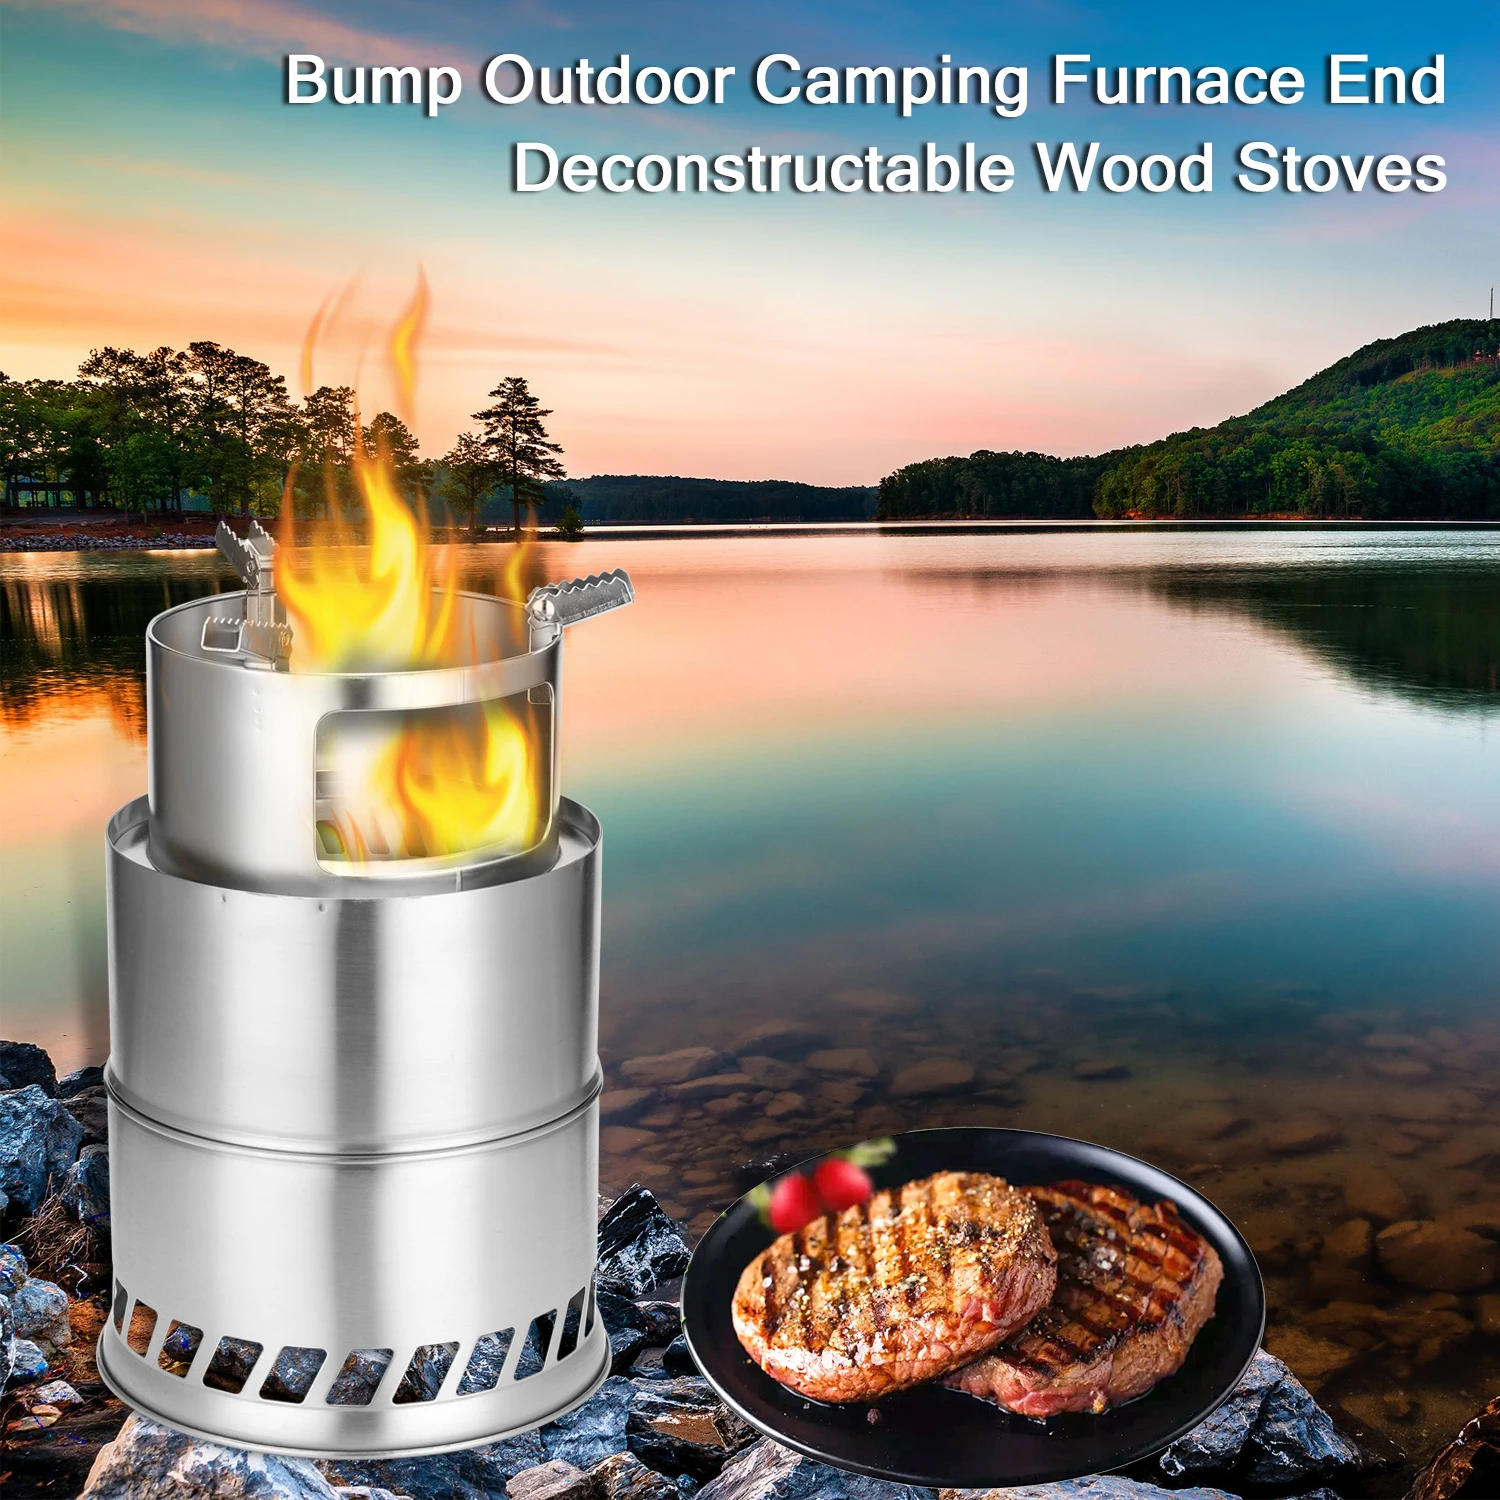 Outdoor Furnace CB7 Camp Cooking Supplies Camping & Hiking Outdoor and Sports